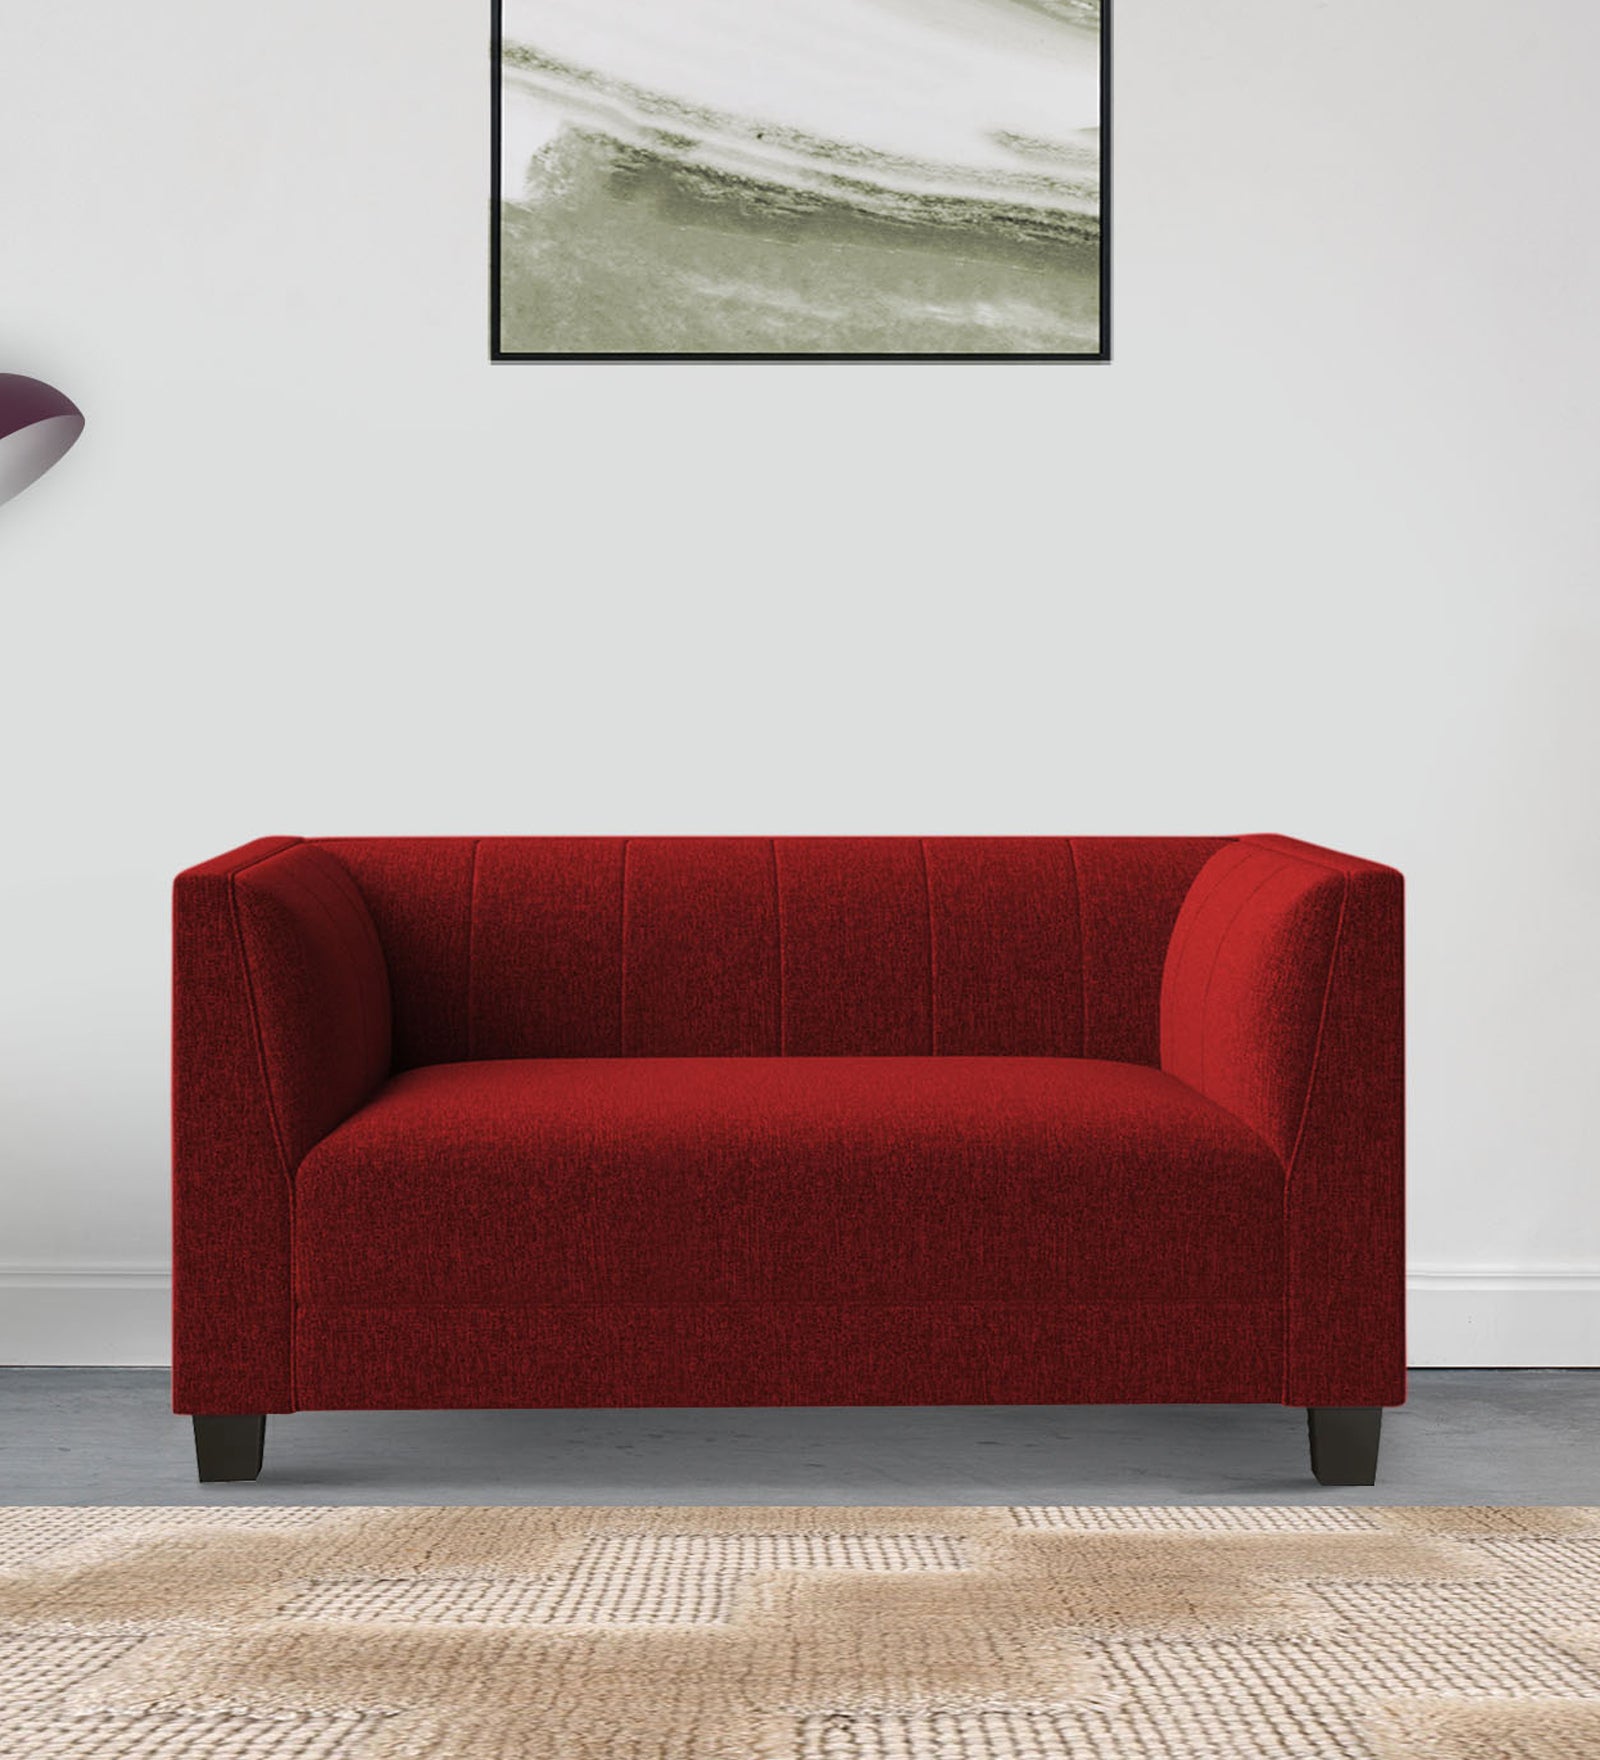 Chastin Fabric 2 Seater Sofa in Blood Maroon Colour